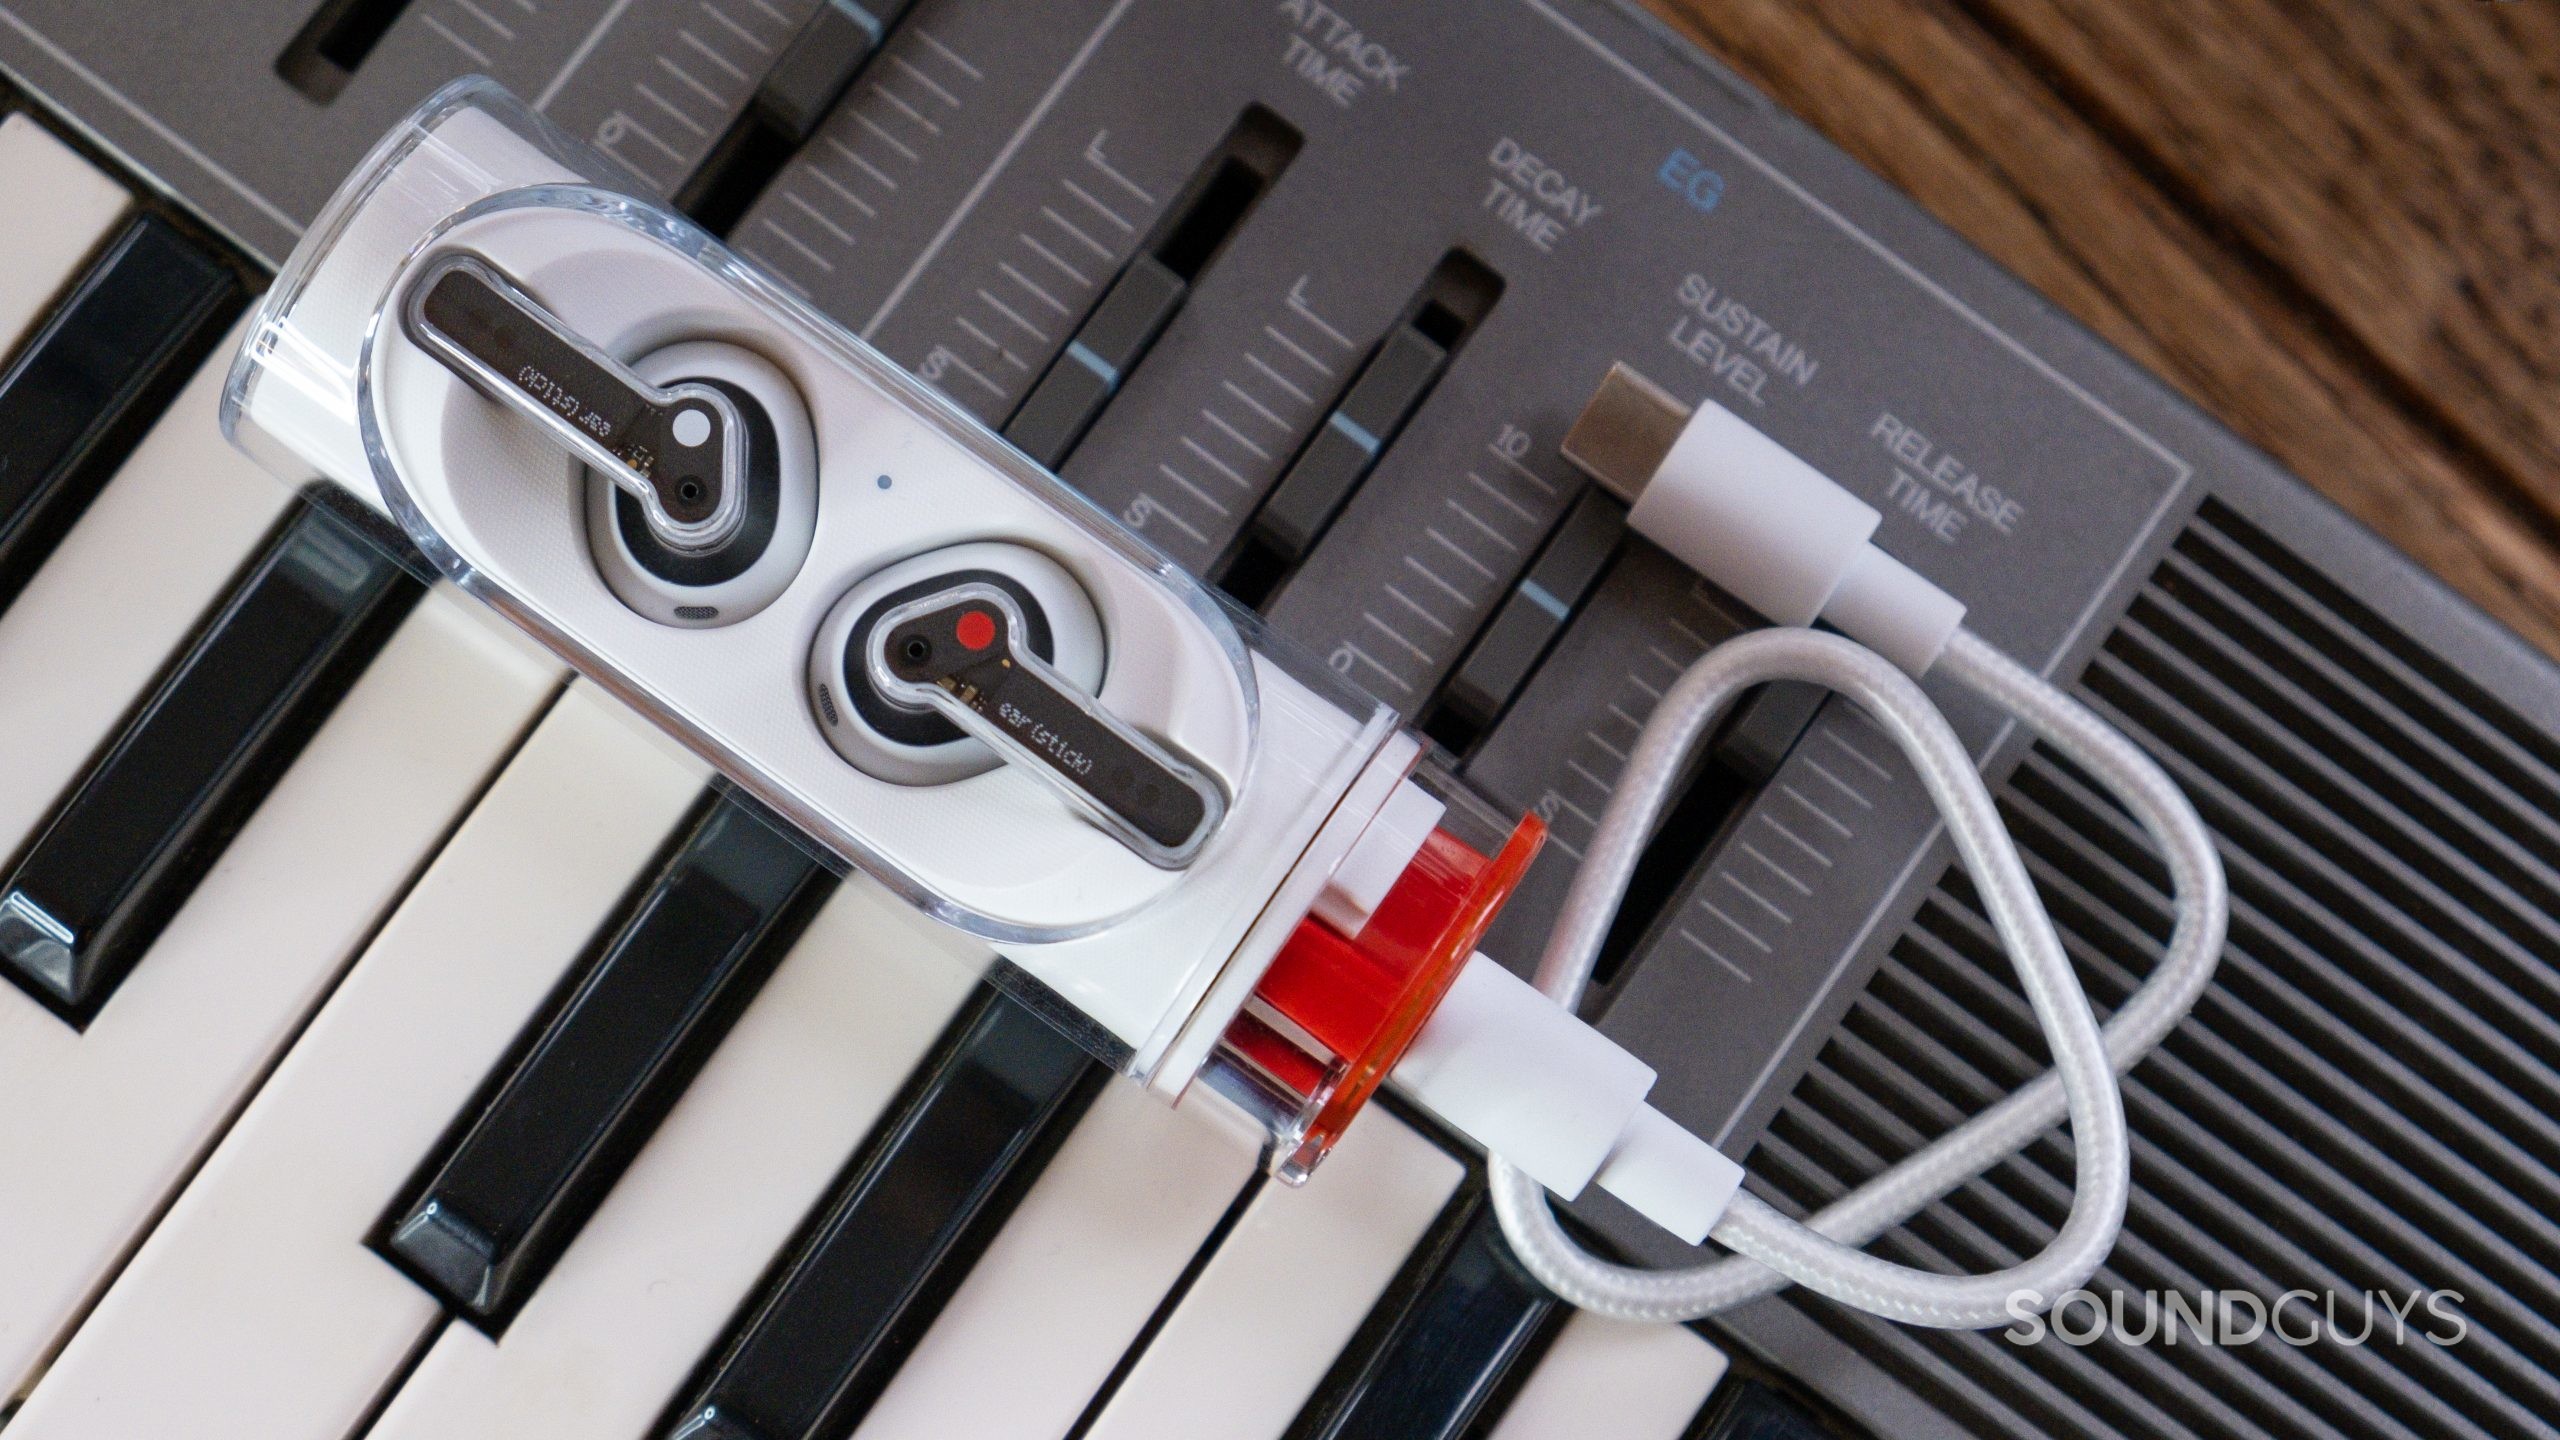 The open case of the Nothing Ear stick with the included USB-C to USB-C cable rests atop a grey analog synth.